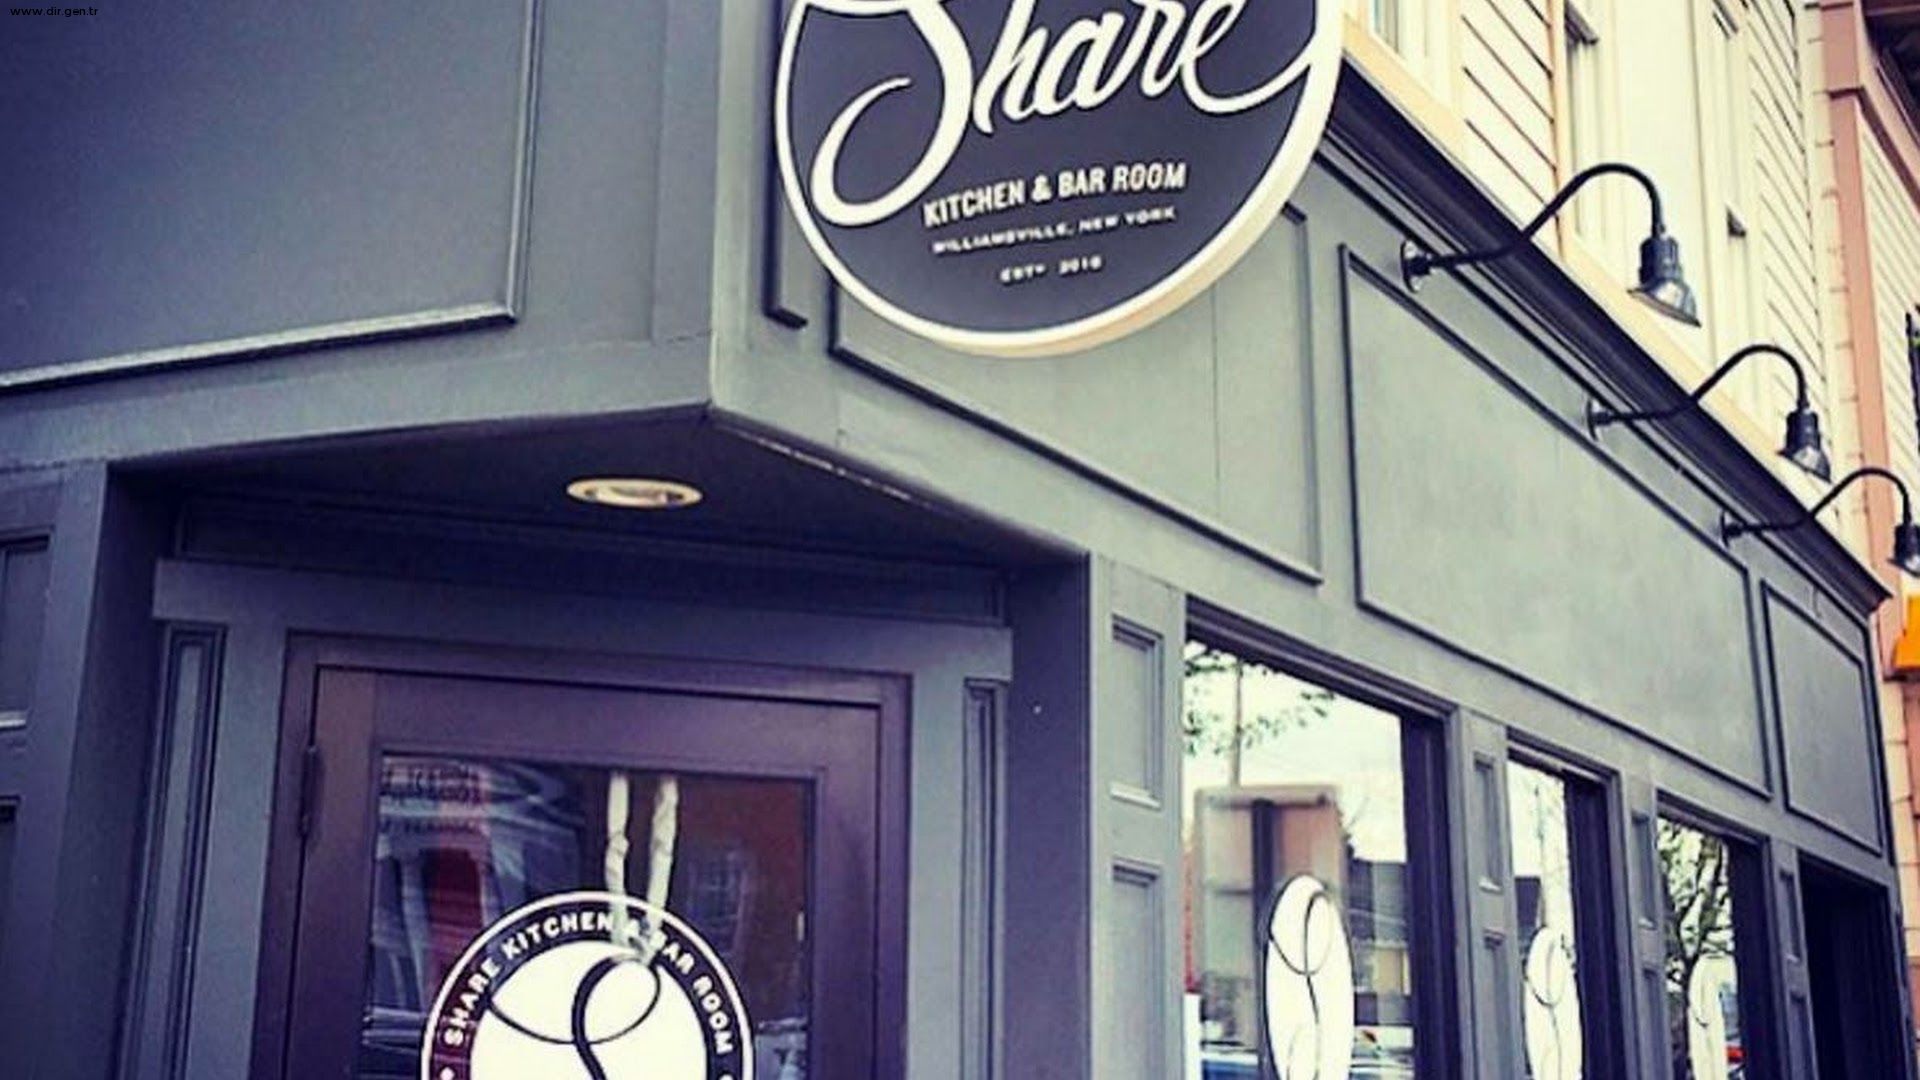 share kitchen and bar room food truck